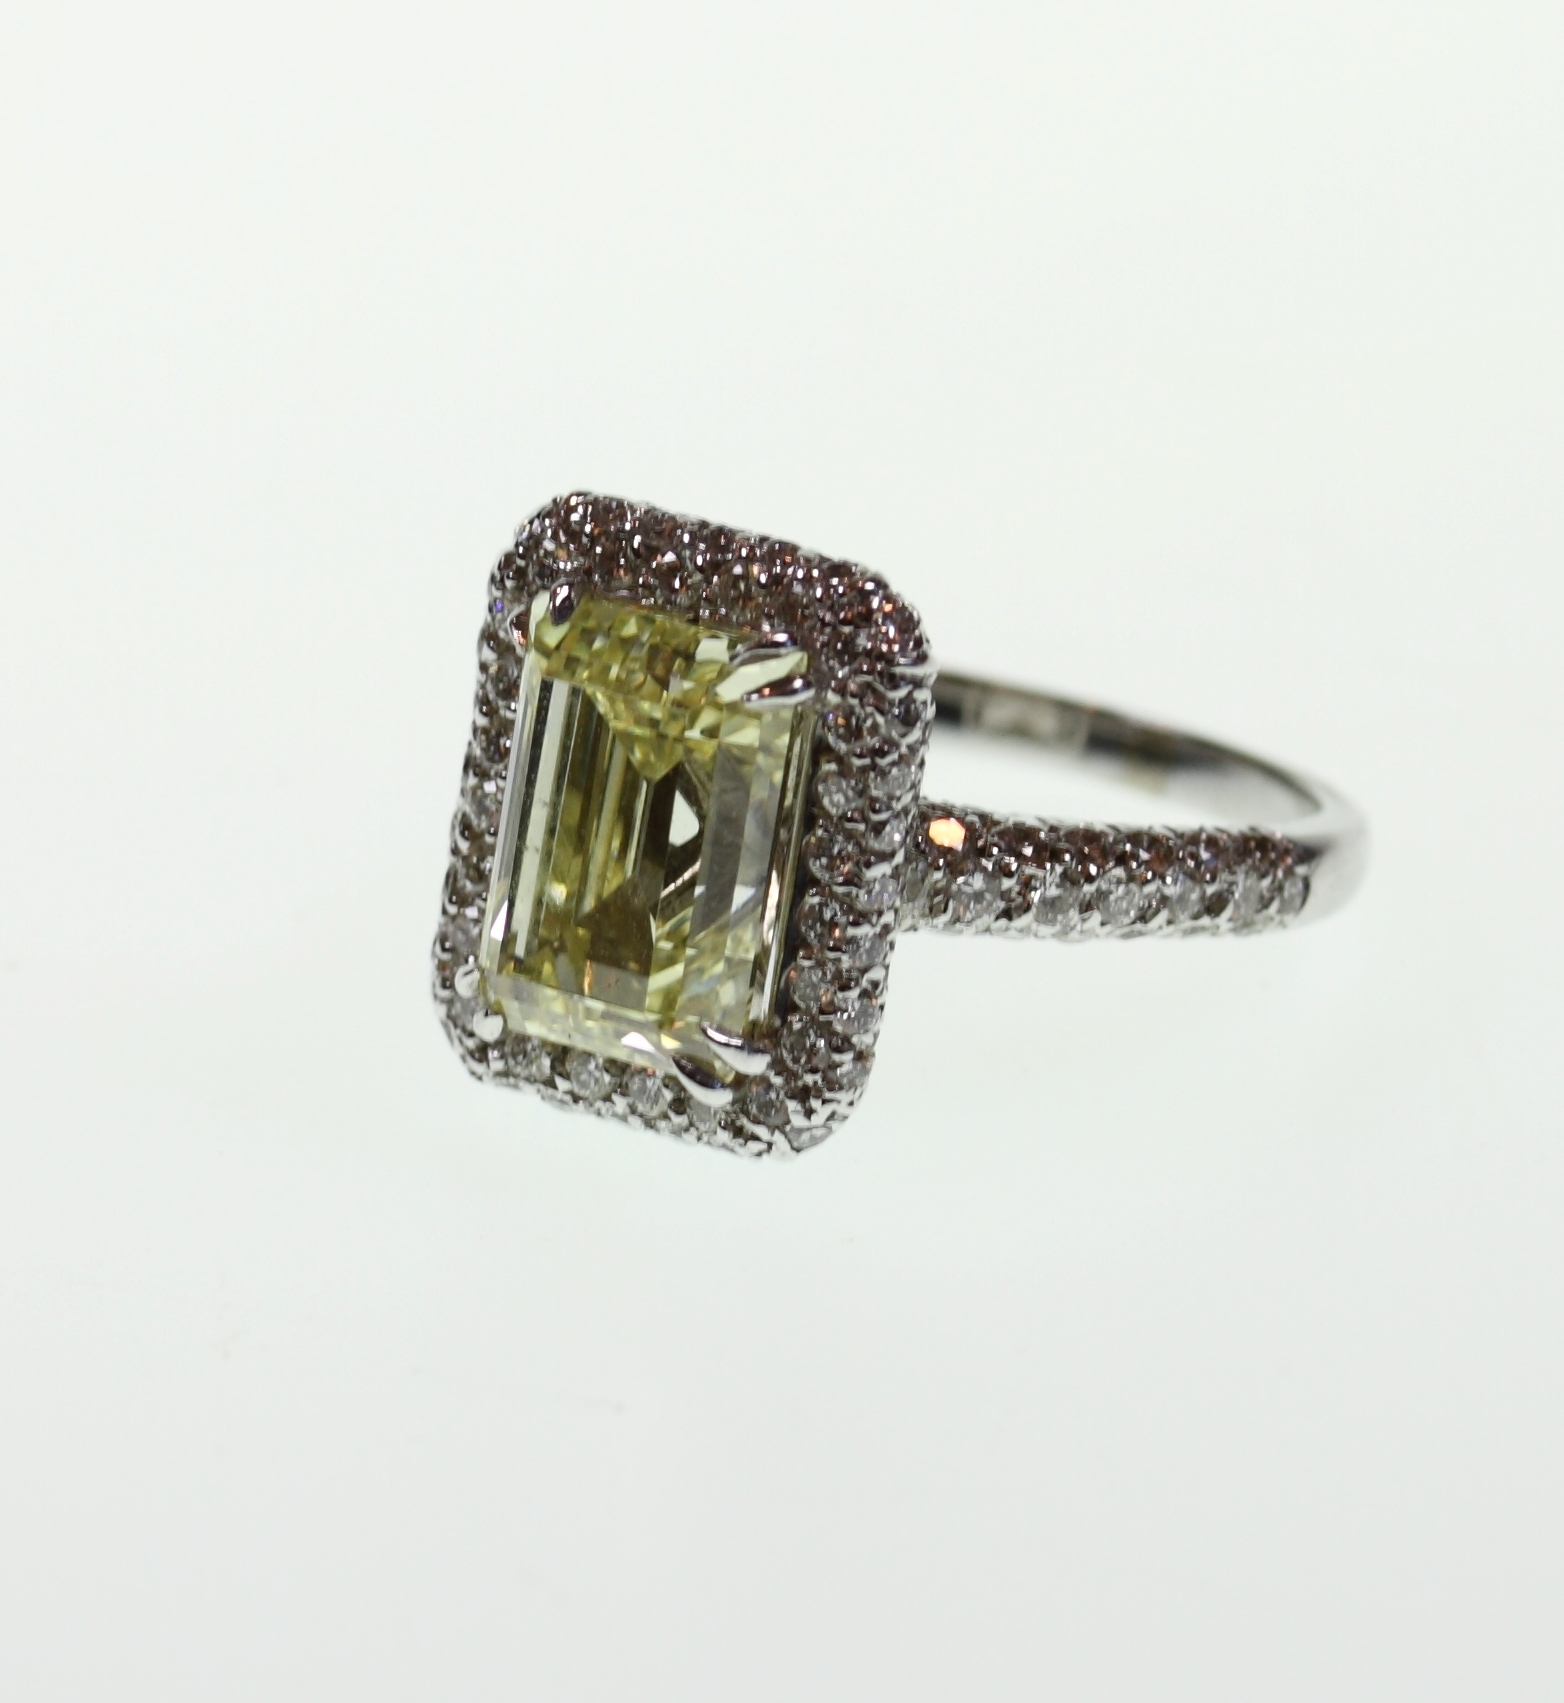 A Natural Fancy Yellow Diamond Dress Ring. 3.75 carats VS2. Size M. With GIA of America certificate. - Image 6 of 8